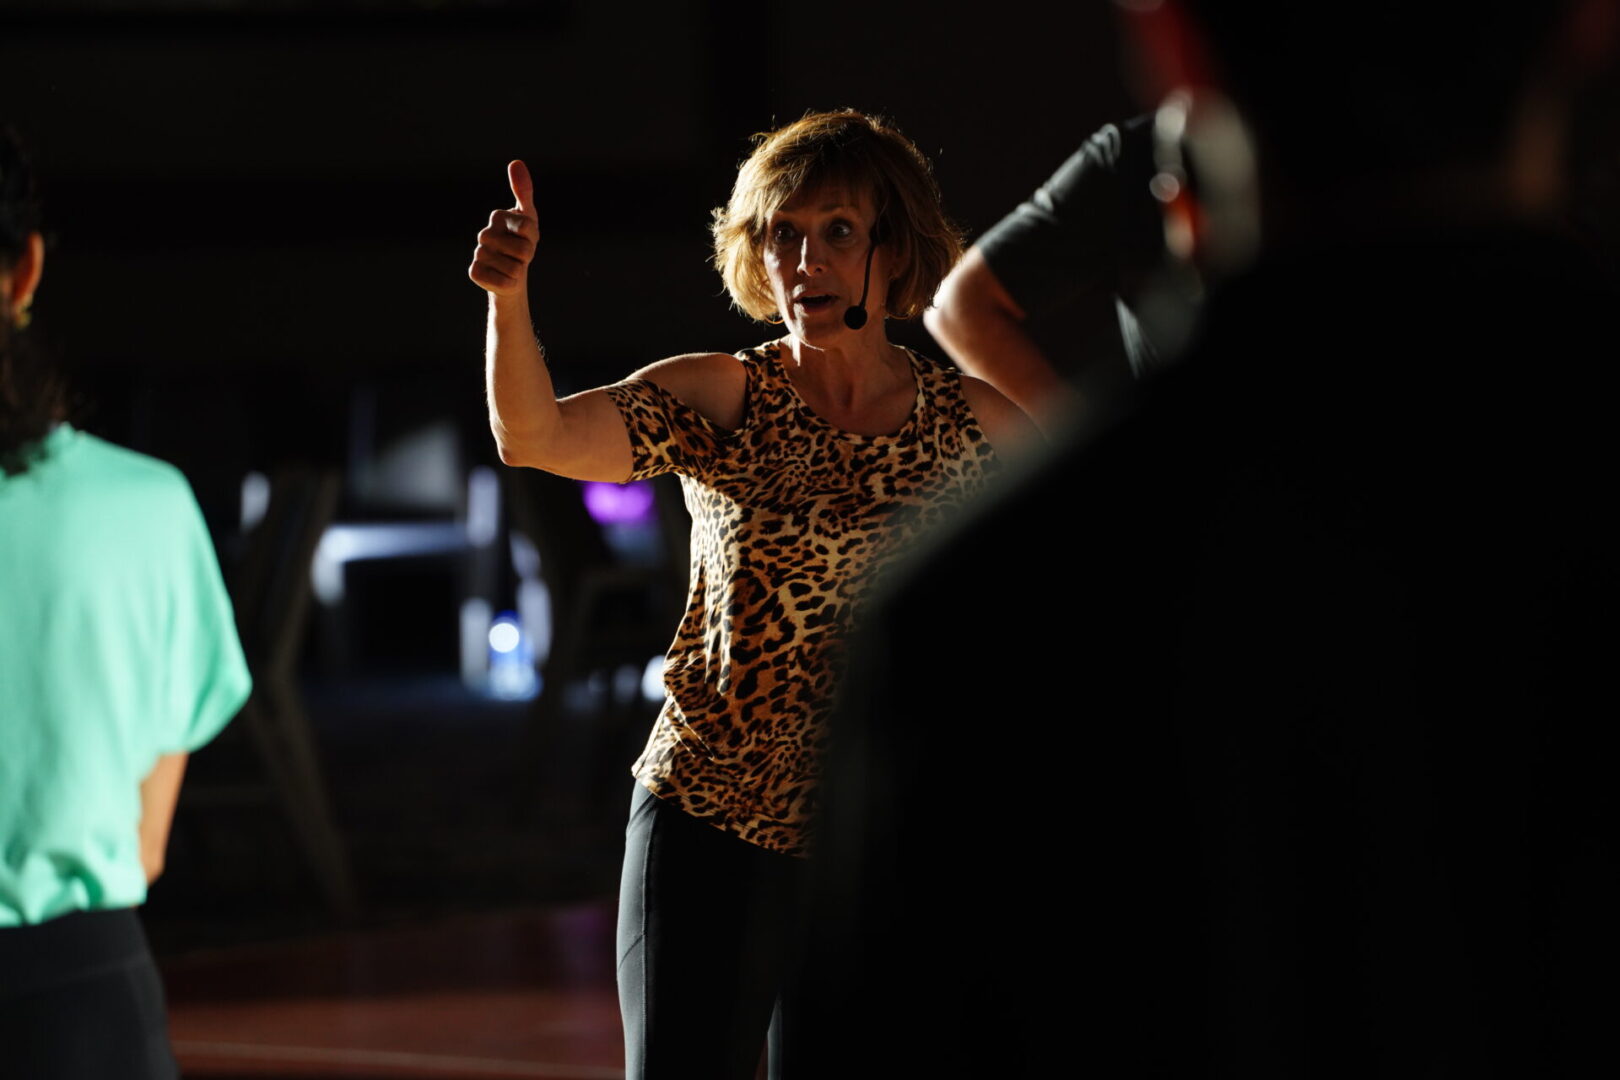 A woman in leopard print shirt holding up two fingers.